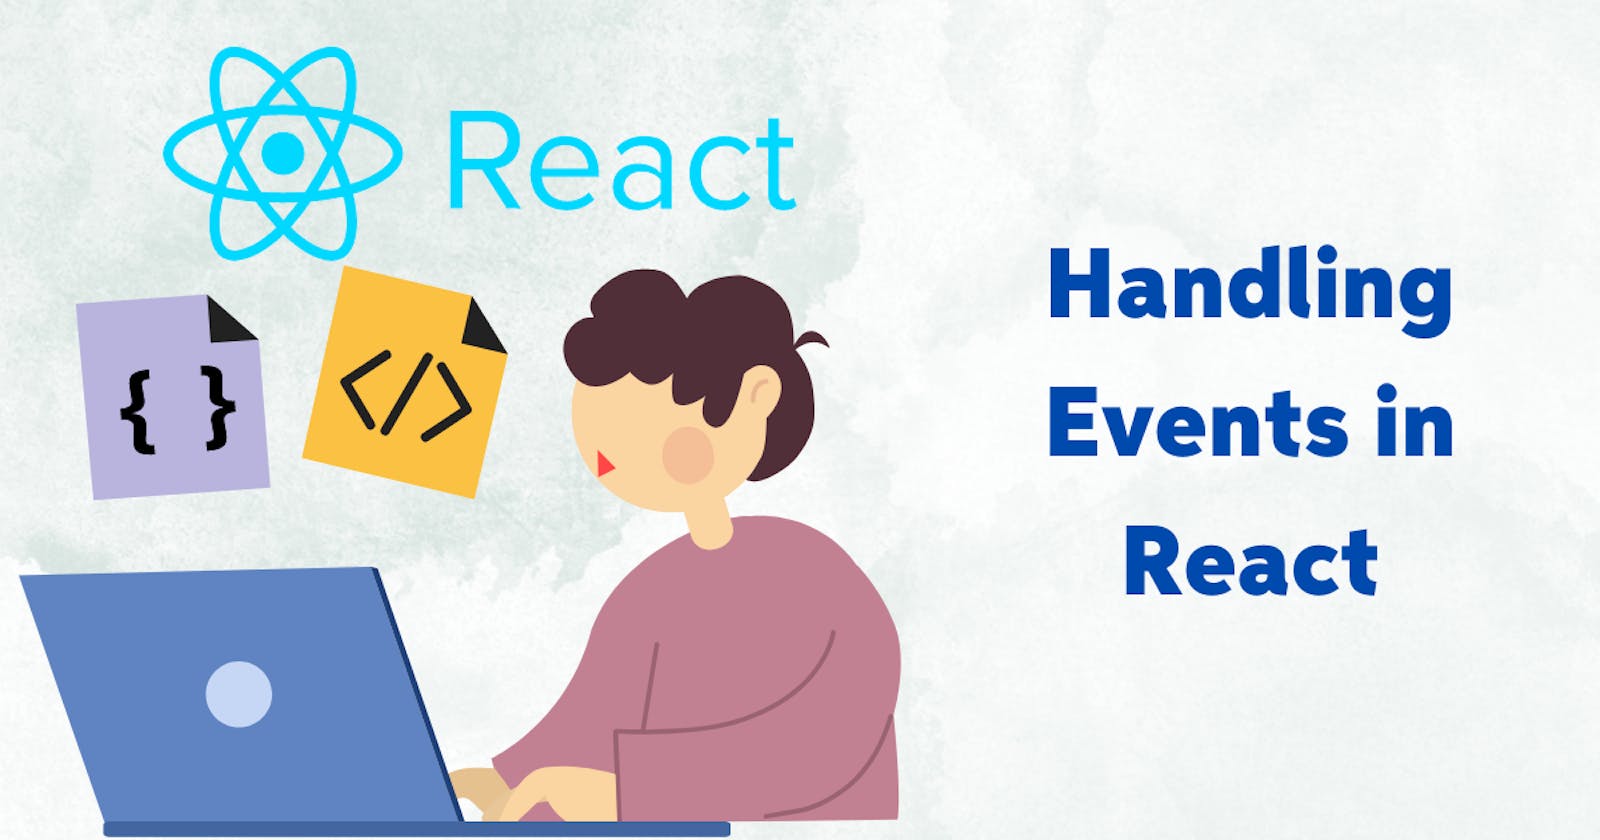 Handling Events in React: Working with event handlers in React components.